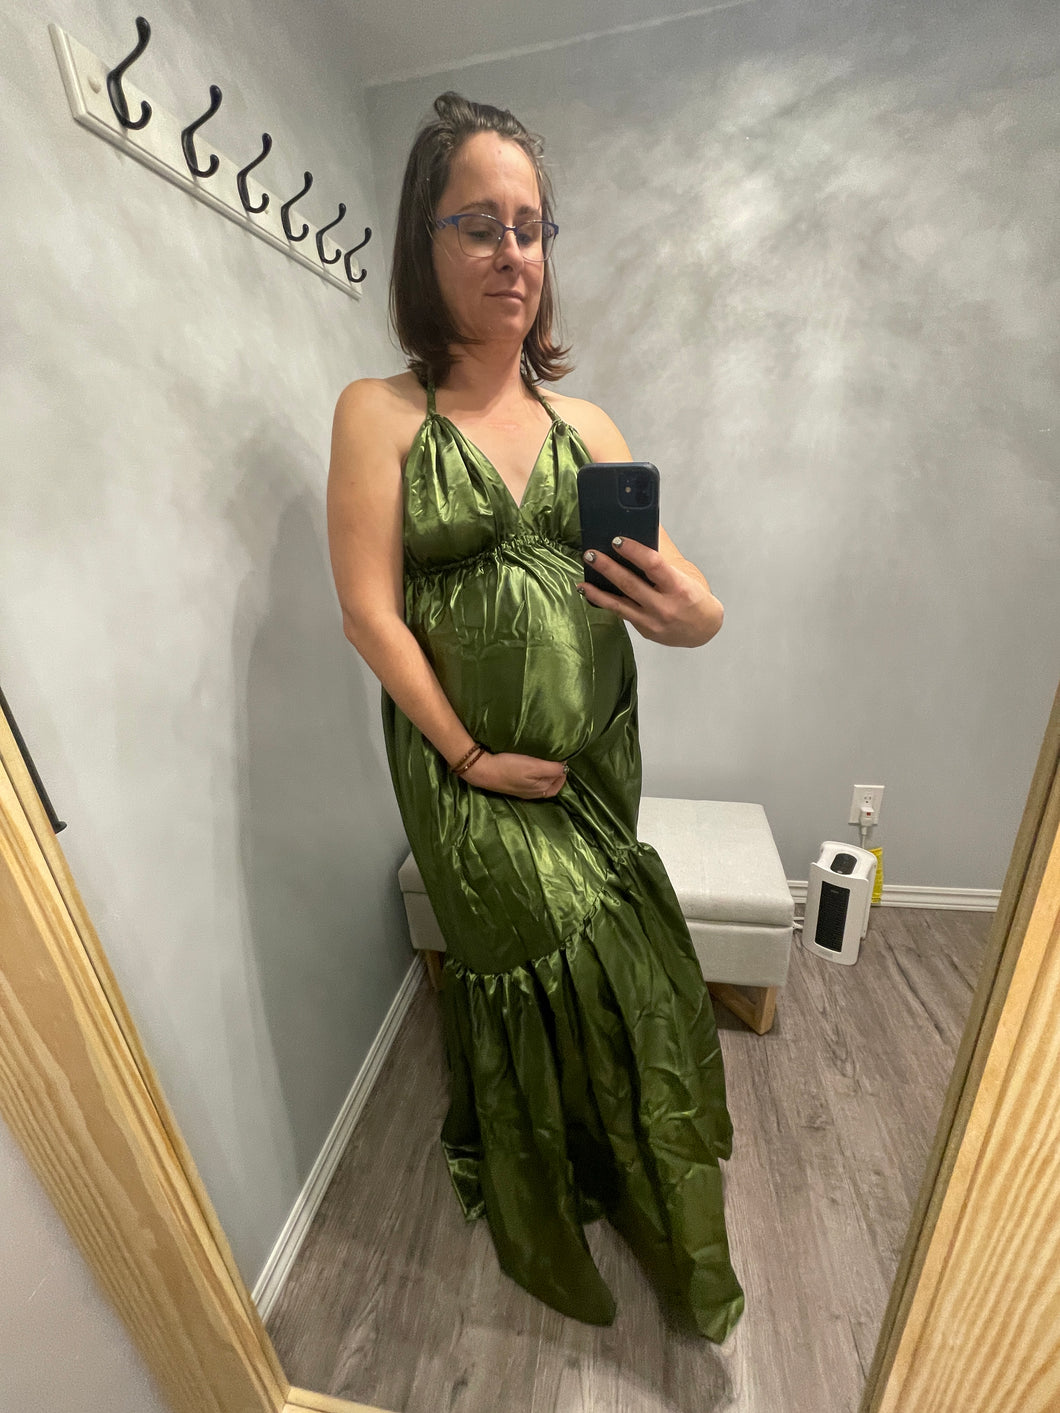 An olive halter top maternity photoshoot gown. You can rent or buy this dress for your pregnancy.